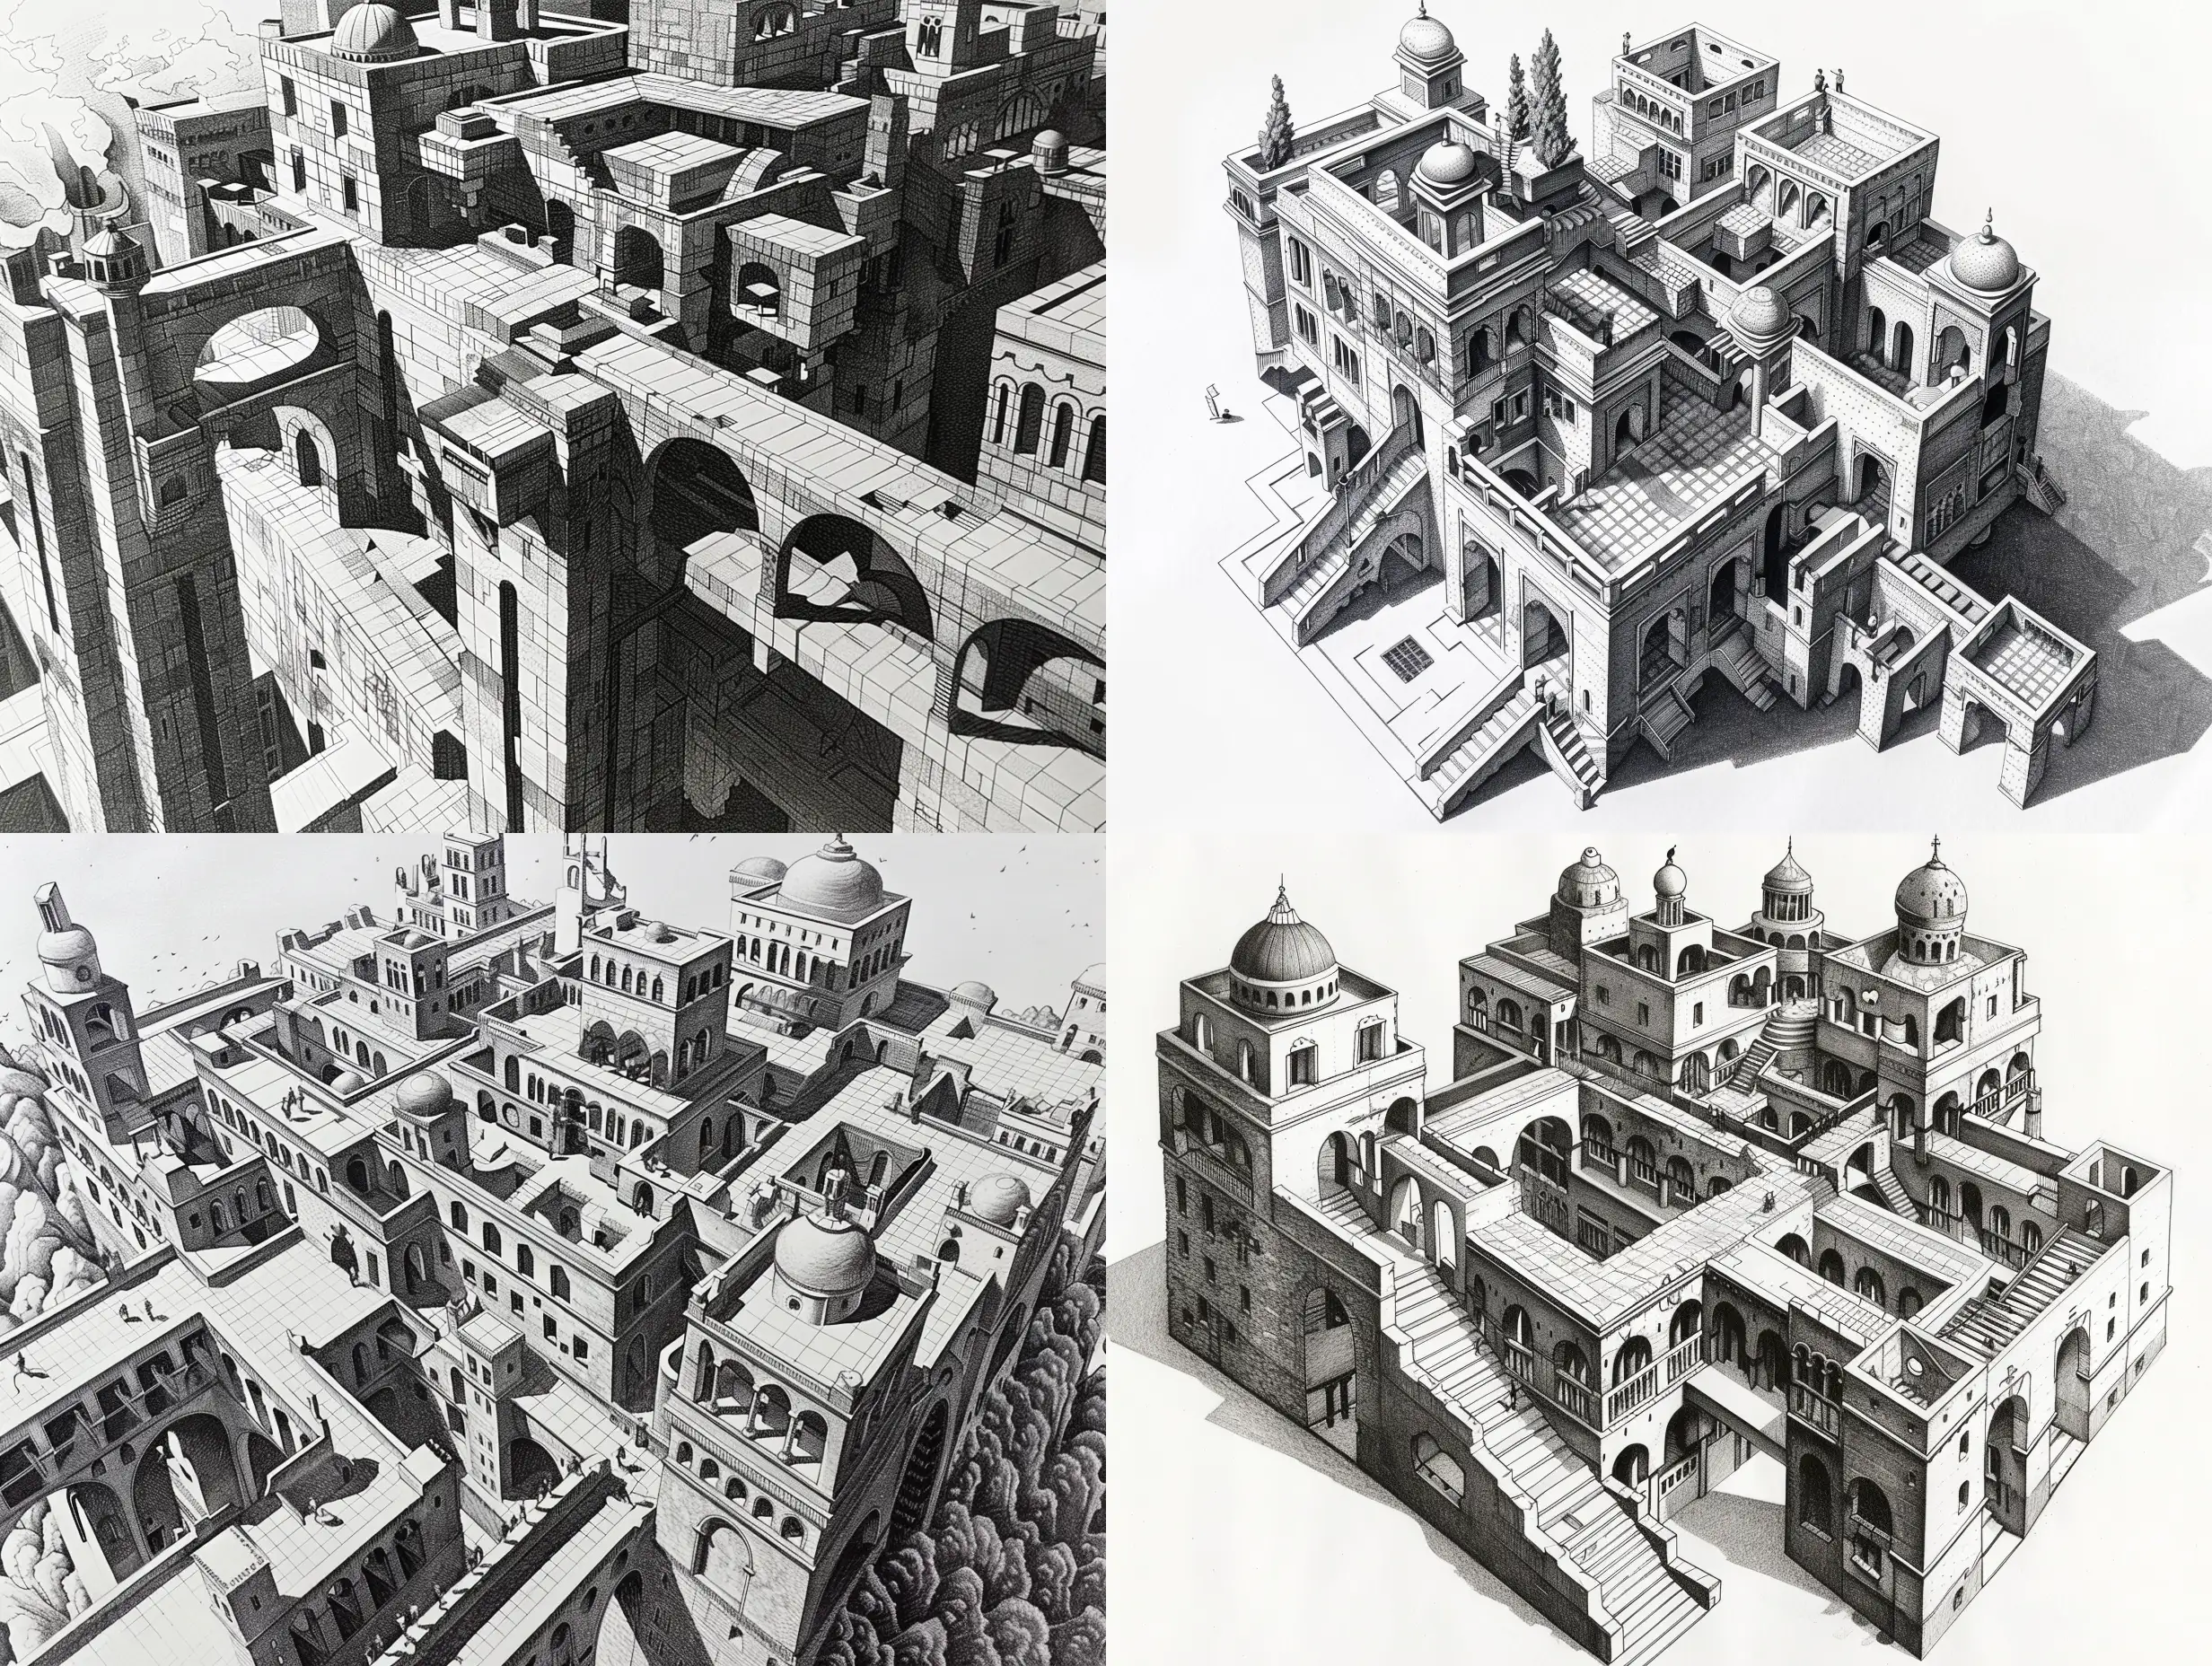 MC Escher and Syd Mead has had an architecture drawing jam, and this is the result